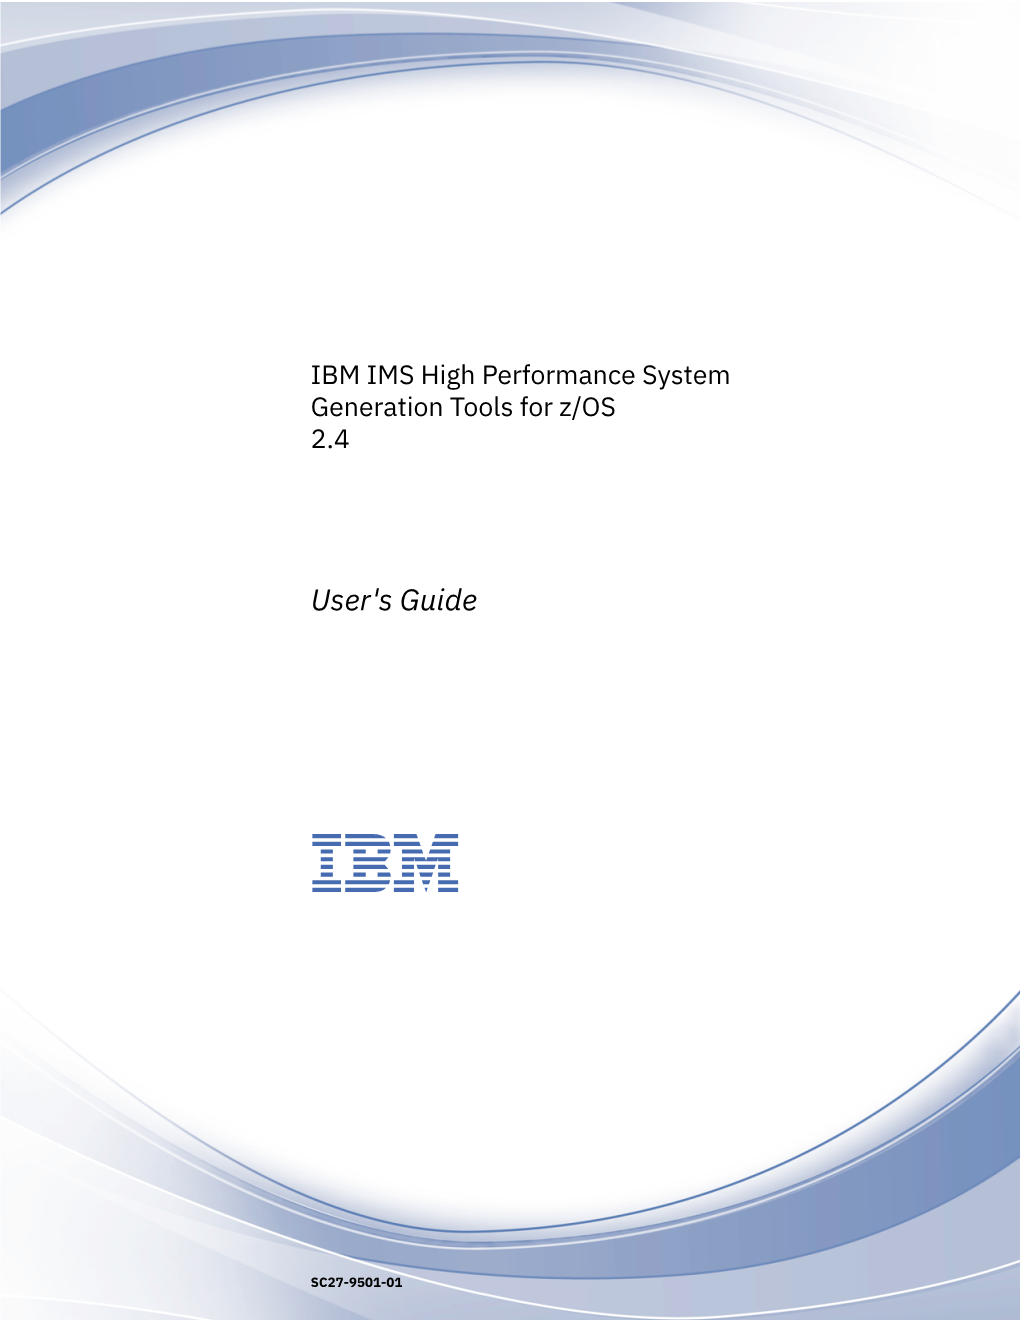 IMS High Performance System Generation Tools: User's Guide Part 1